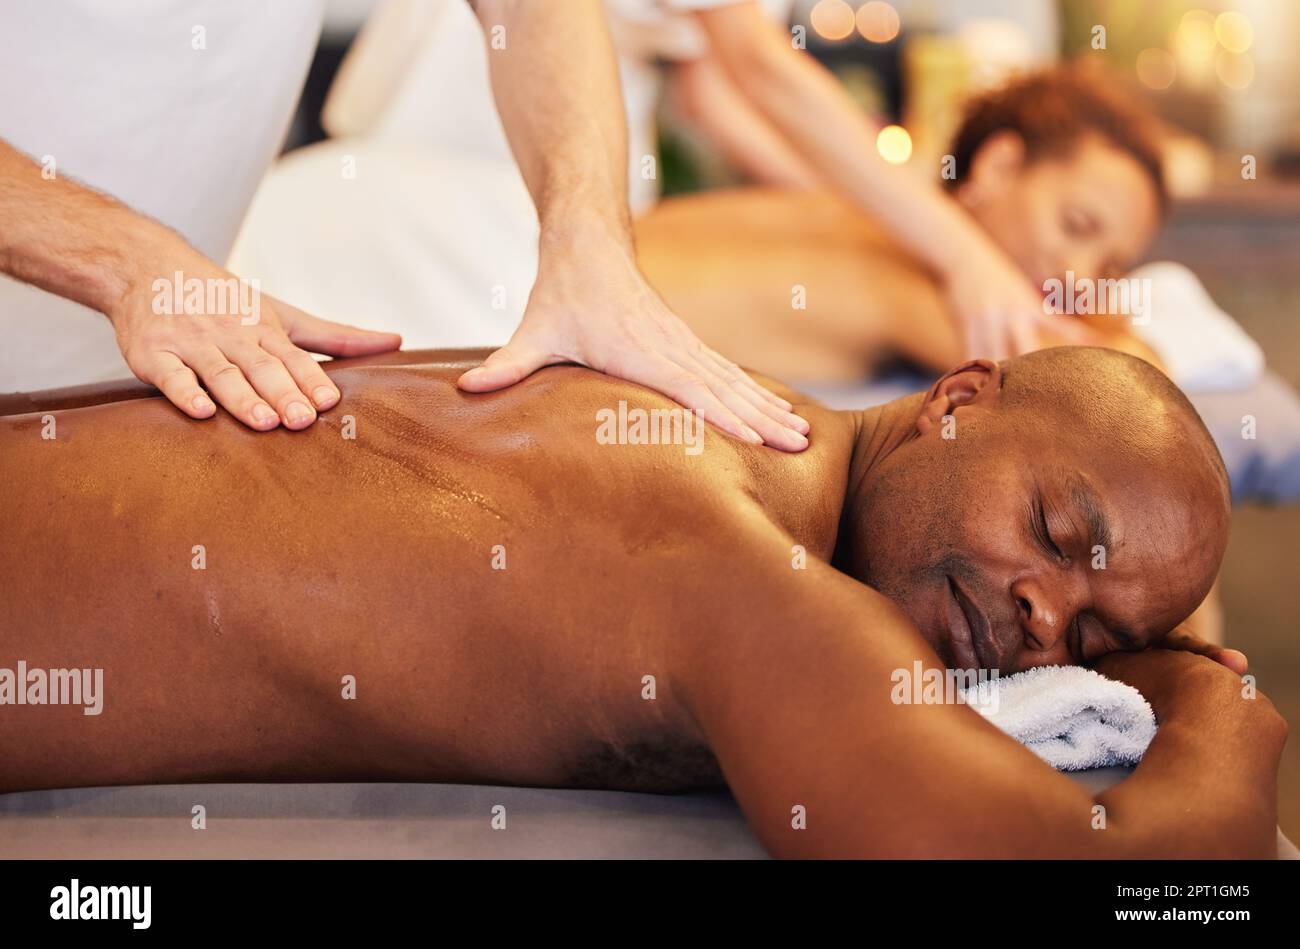 https://c8.alamy.com/comp/2PT1GM5/skincare-massage-and-physiotherapy-hands-for-zen-couple-in-spa-for-wellness-relax-or-health-salon-luxury-and-black-man-and-woman-enjoy-treatment-b-2PT1GM5.jpg